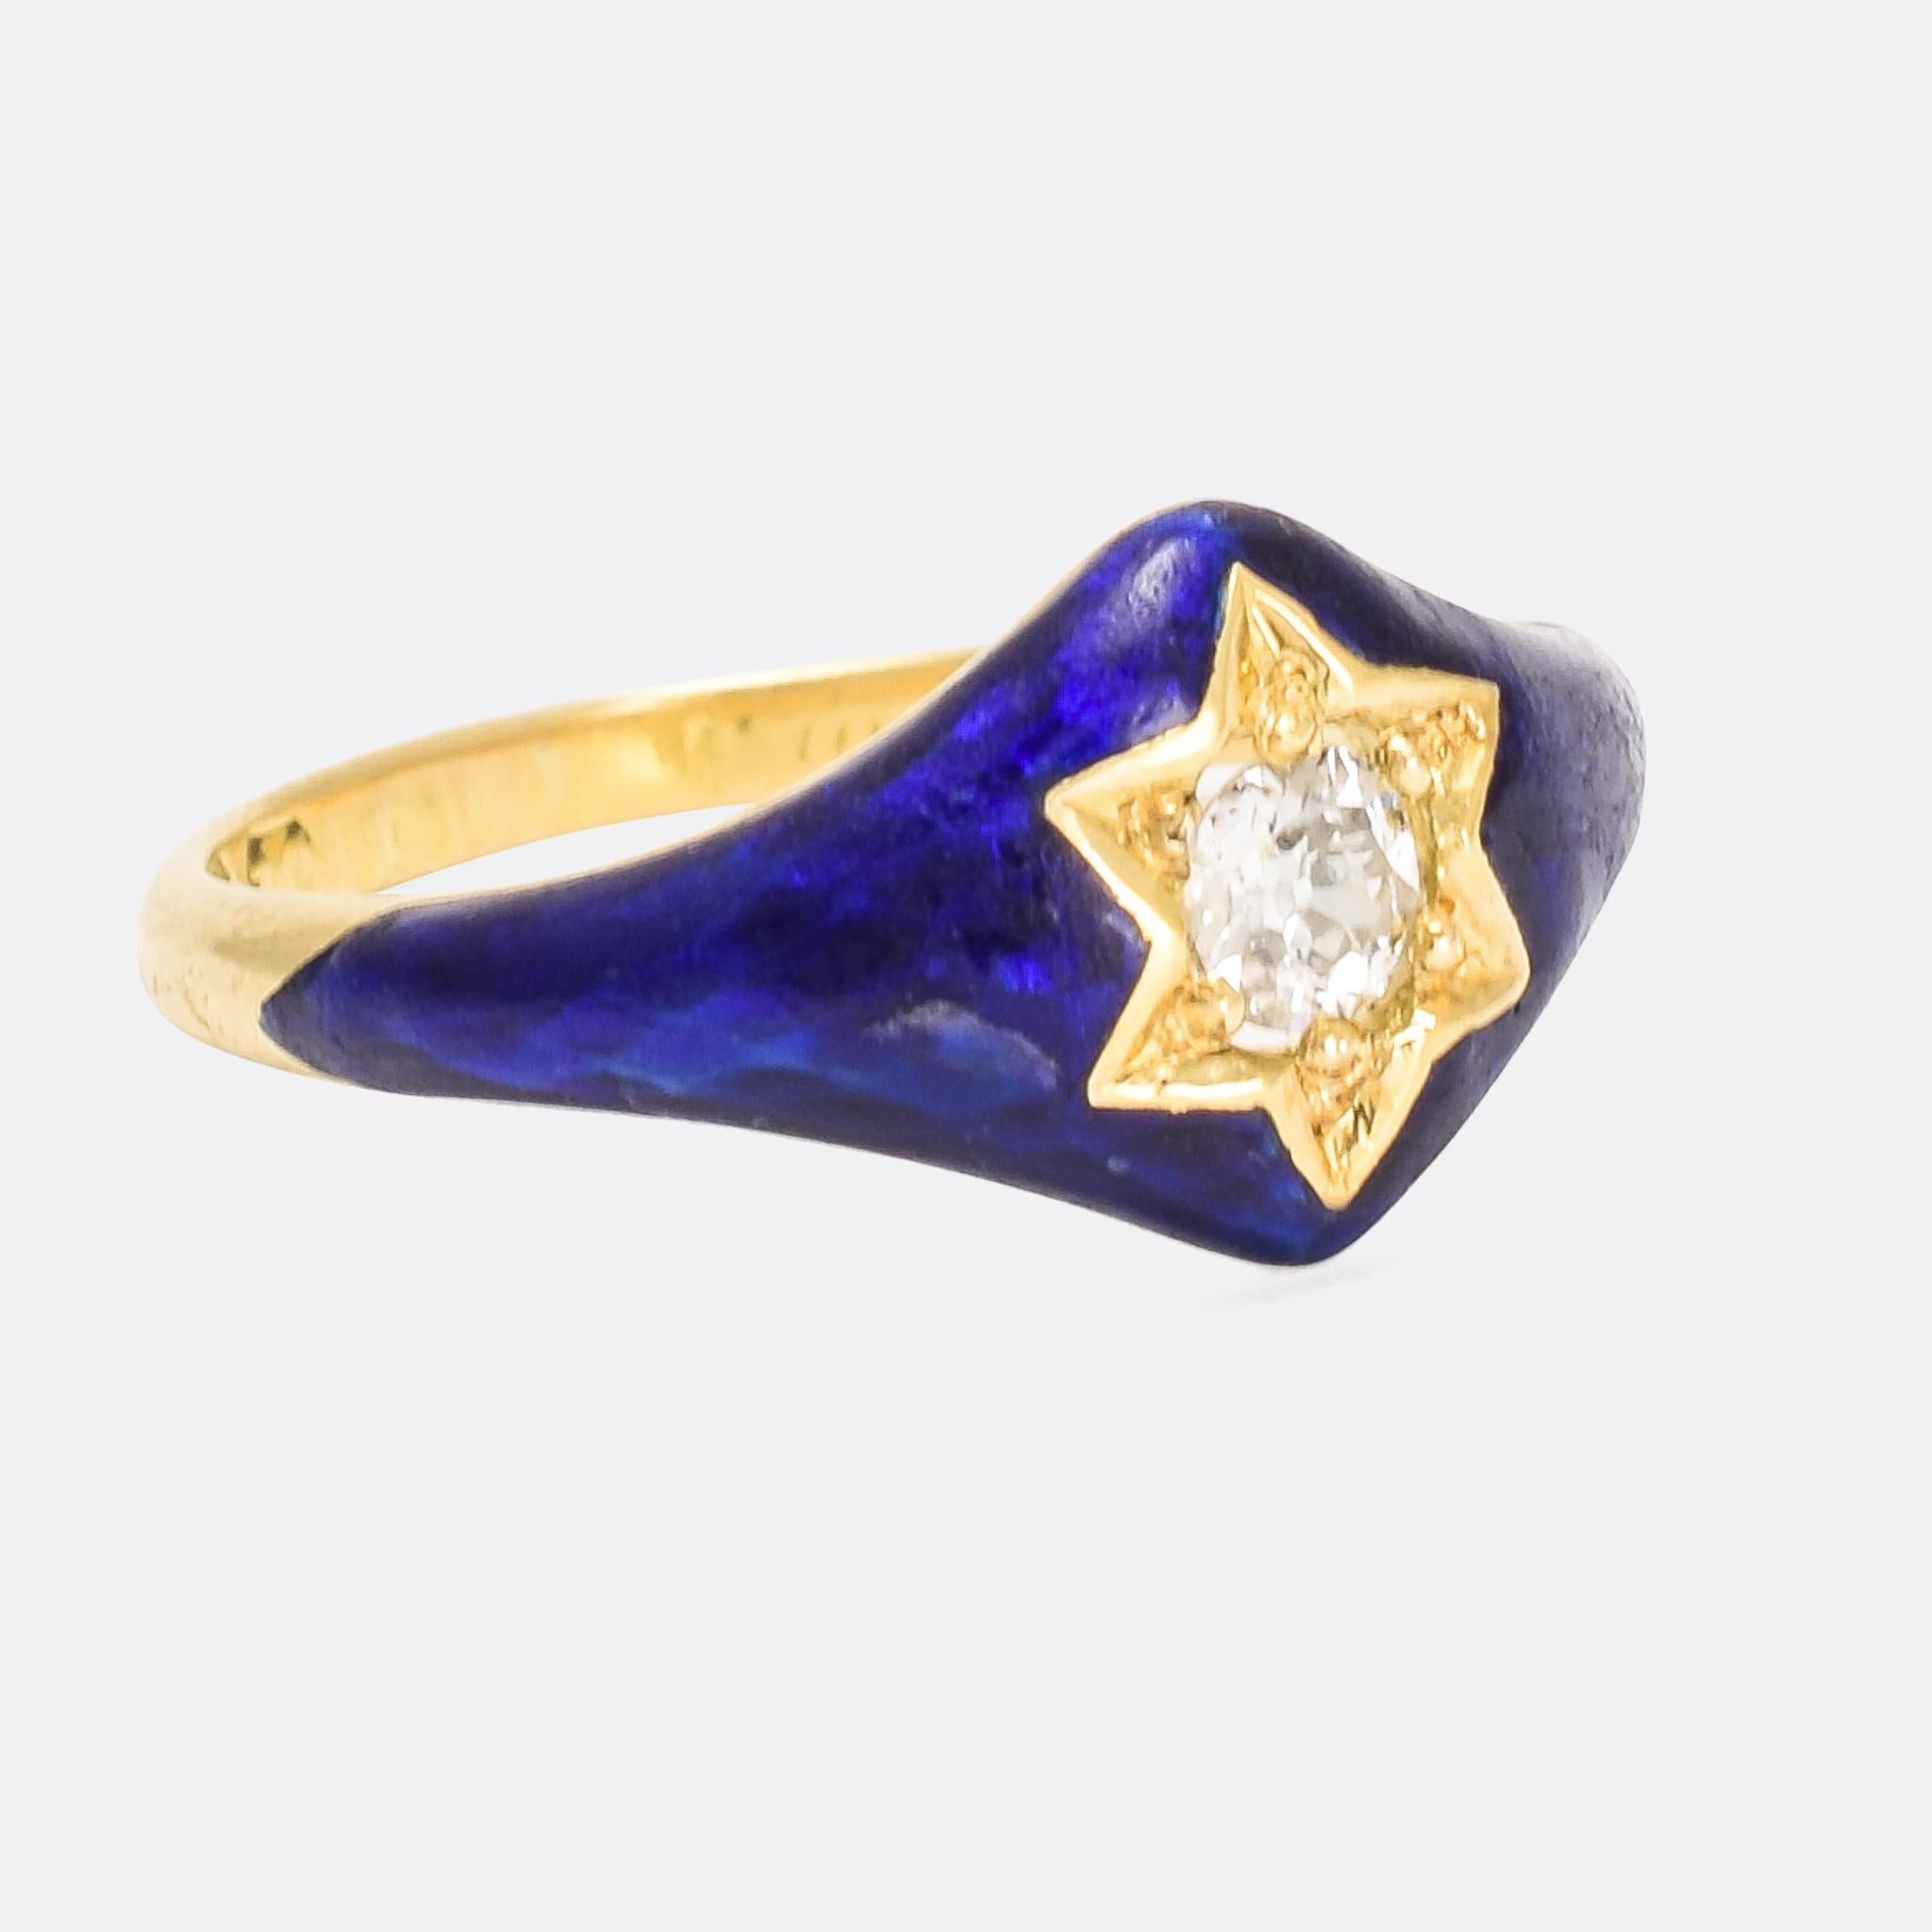 Superb antique star ring set with a central old Euro diamond within a sea of royal blue enamel. It dates from the mid Victorian era, with inscription to the inner band indicating 1858, and surprisingly features a secret locket compartment to the